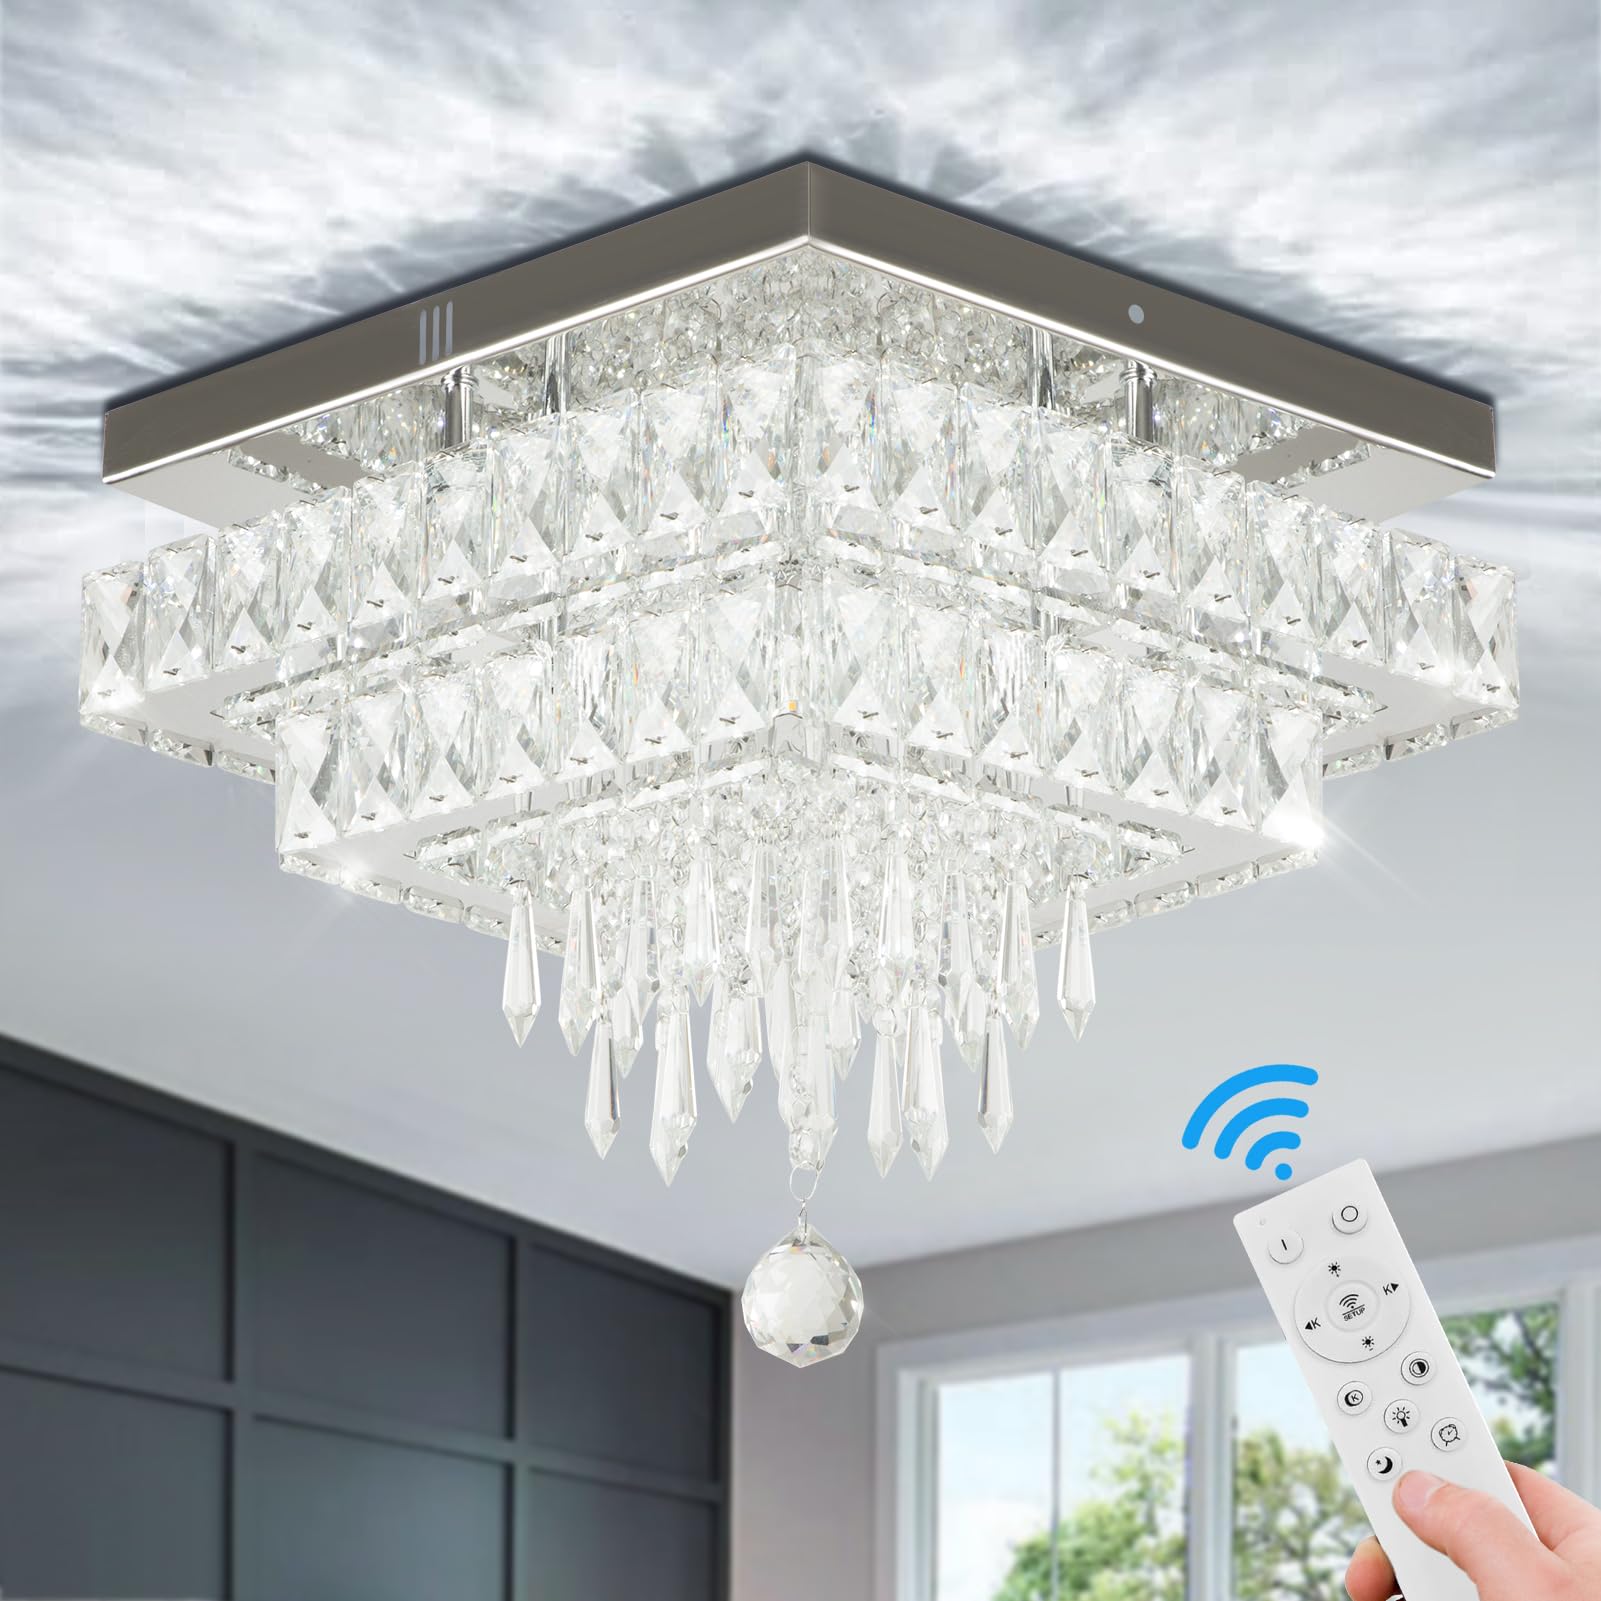 Finktonglan Dimmable Crystal Chandeliers, 13'' Square Crystal Ceiling Lighting with Remote Control, Modern Flush Mount Chandelier Light for Dining Room, Bedrooms, Entryway, Living Room